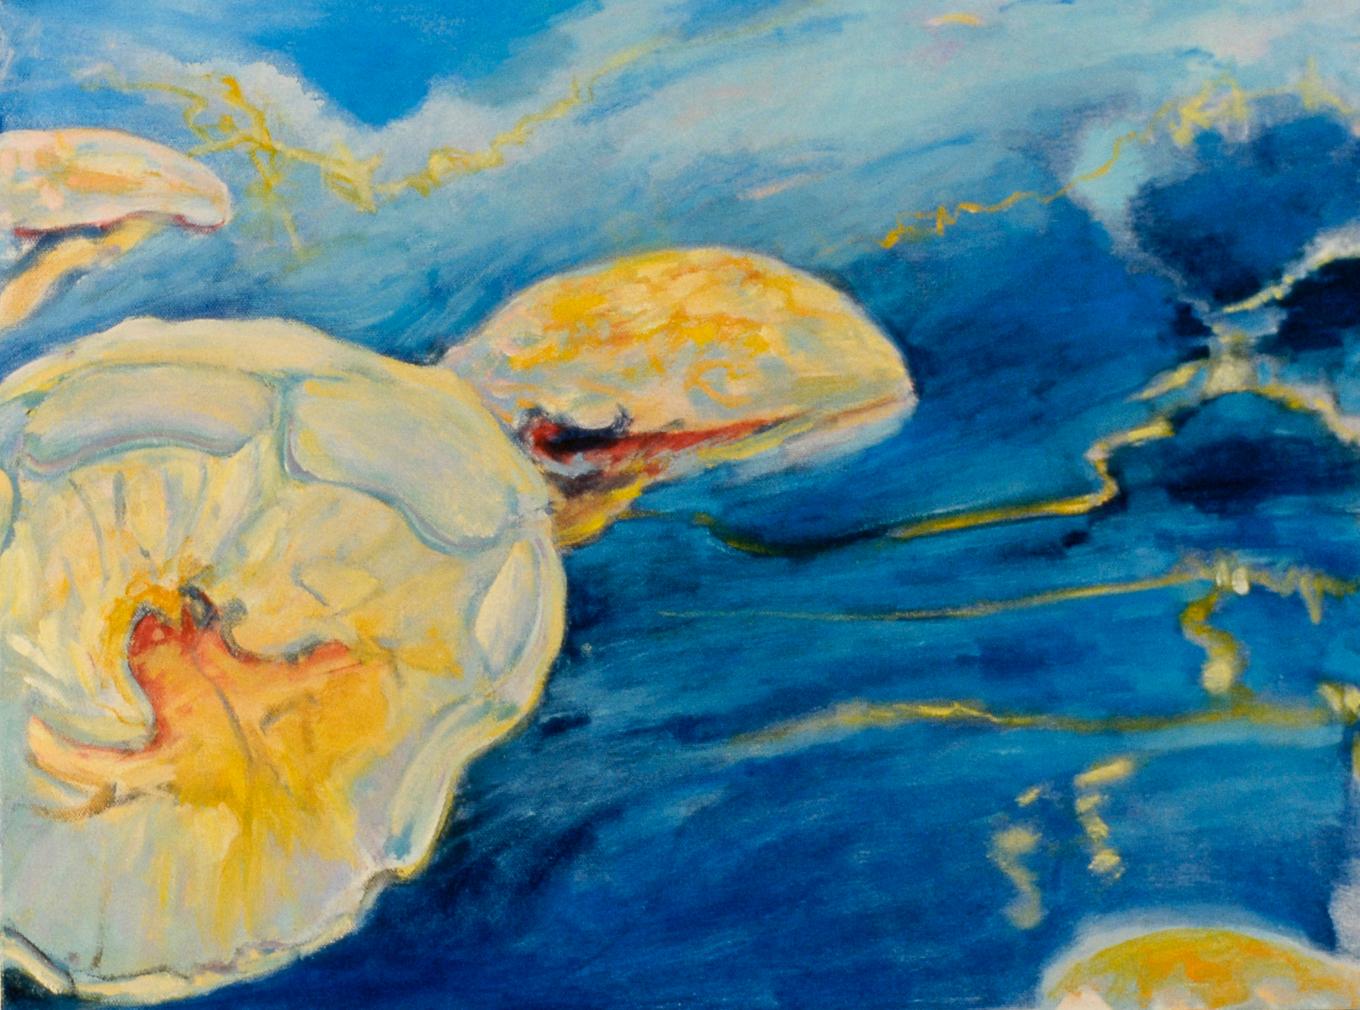 Adrift in the Current, Oil on Canvas, Light and Shadow, Underwater Landscape - Blue Abstract Painting by Ellen Hart